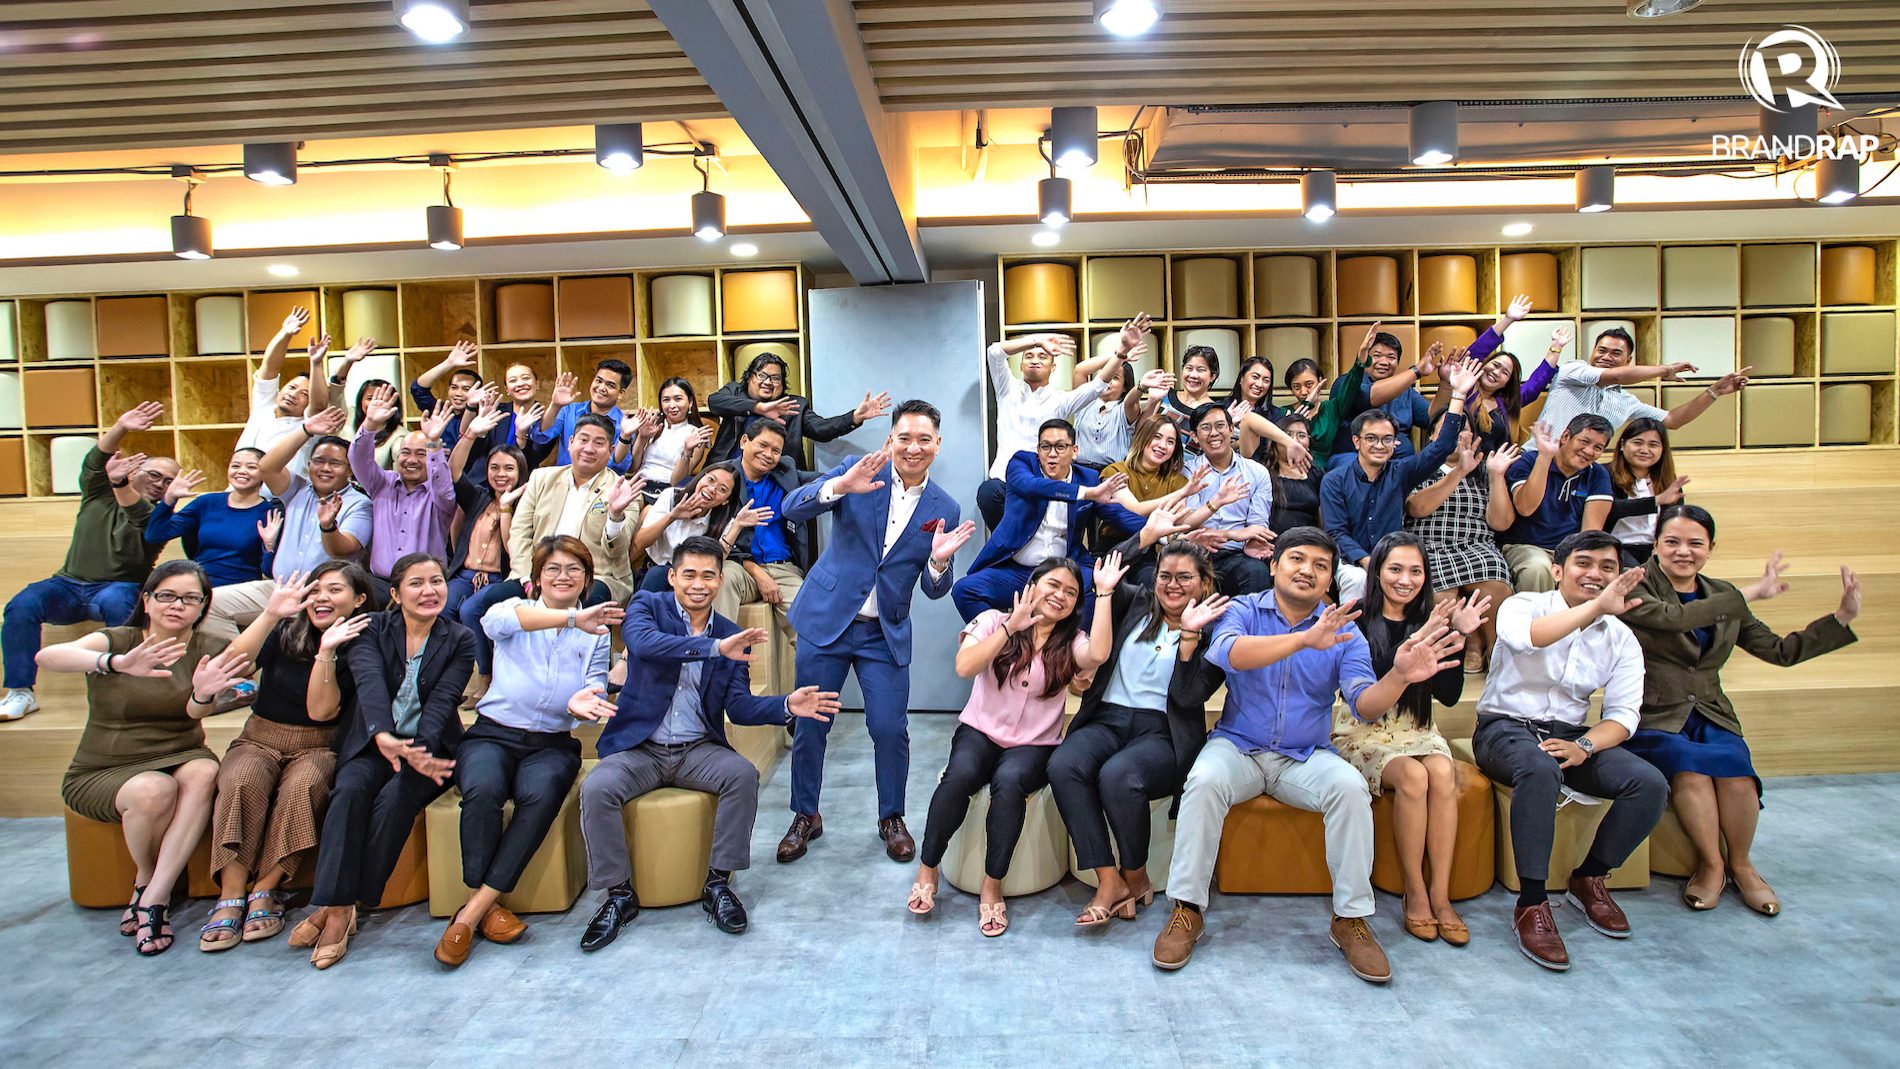 Robinsons Offices welcomes back employees with a new, hip workplace